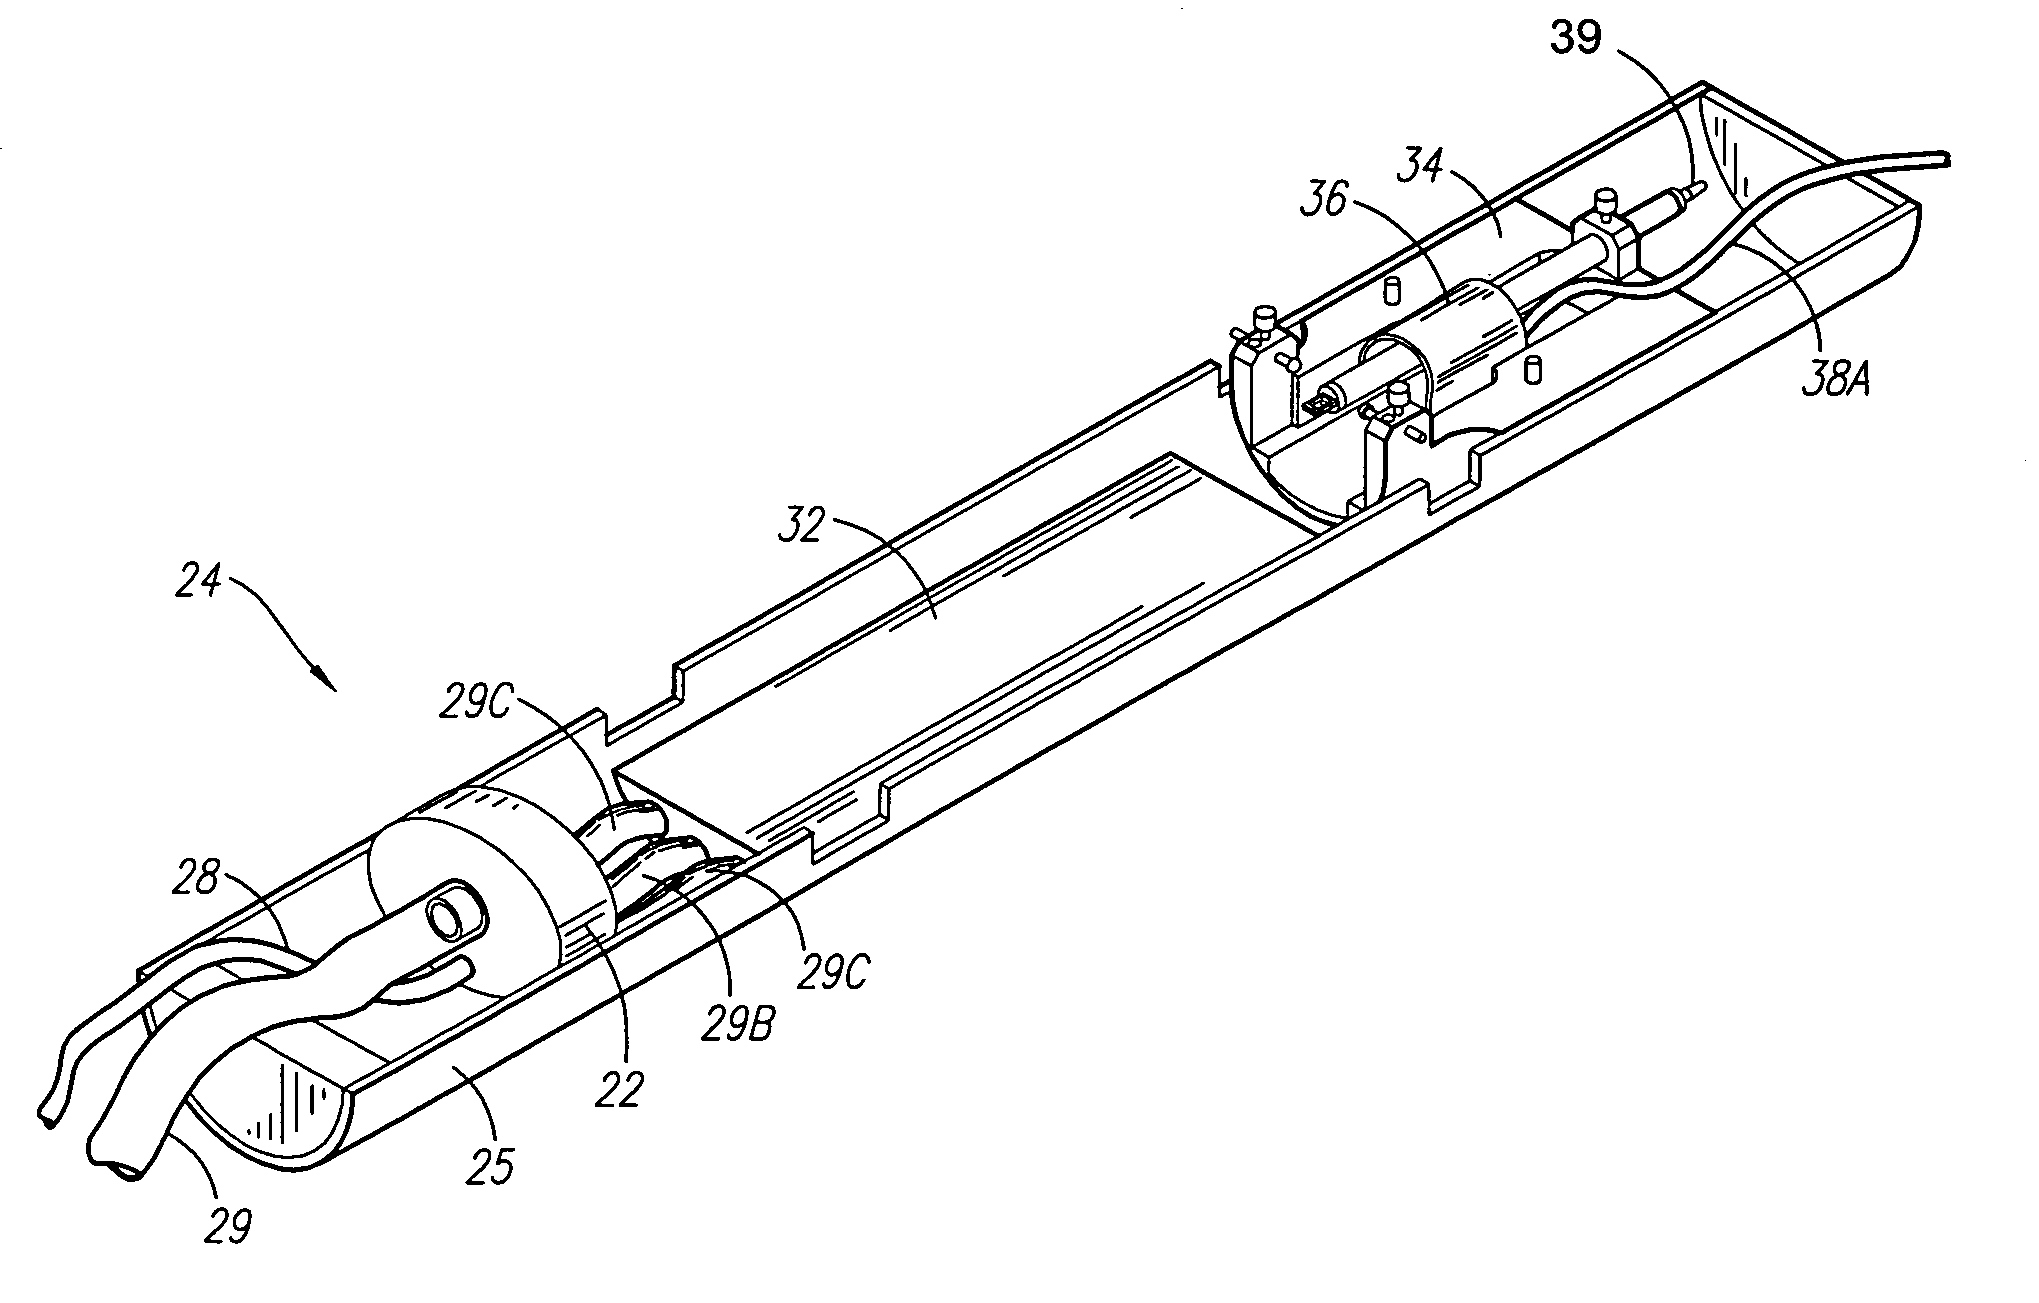 Animal imaging holding device and method